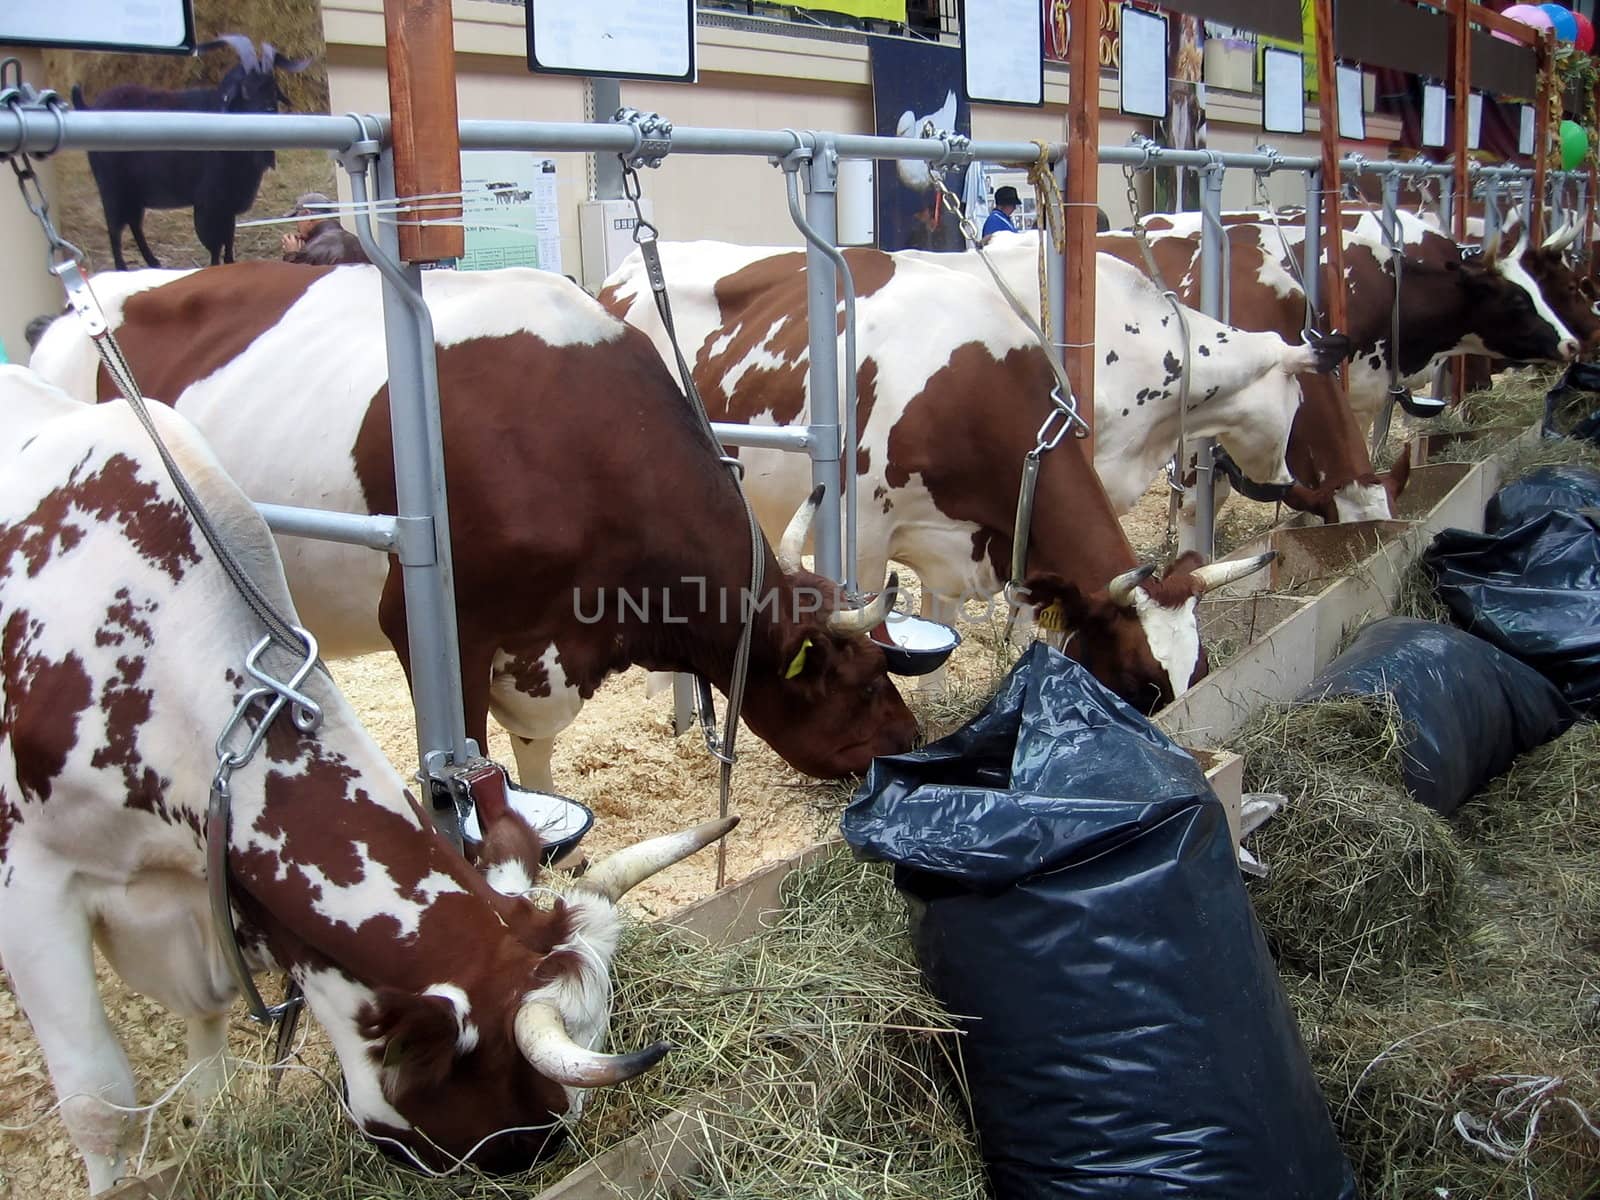 Line of various cows at the farm exhibition